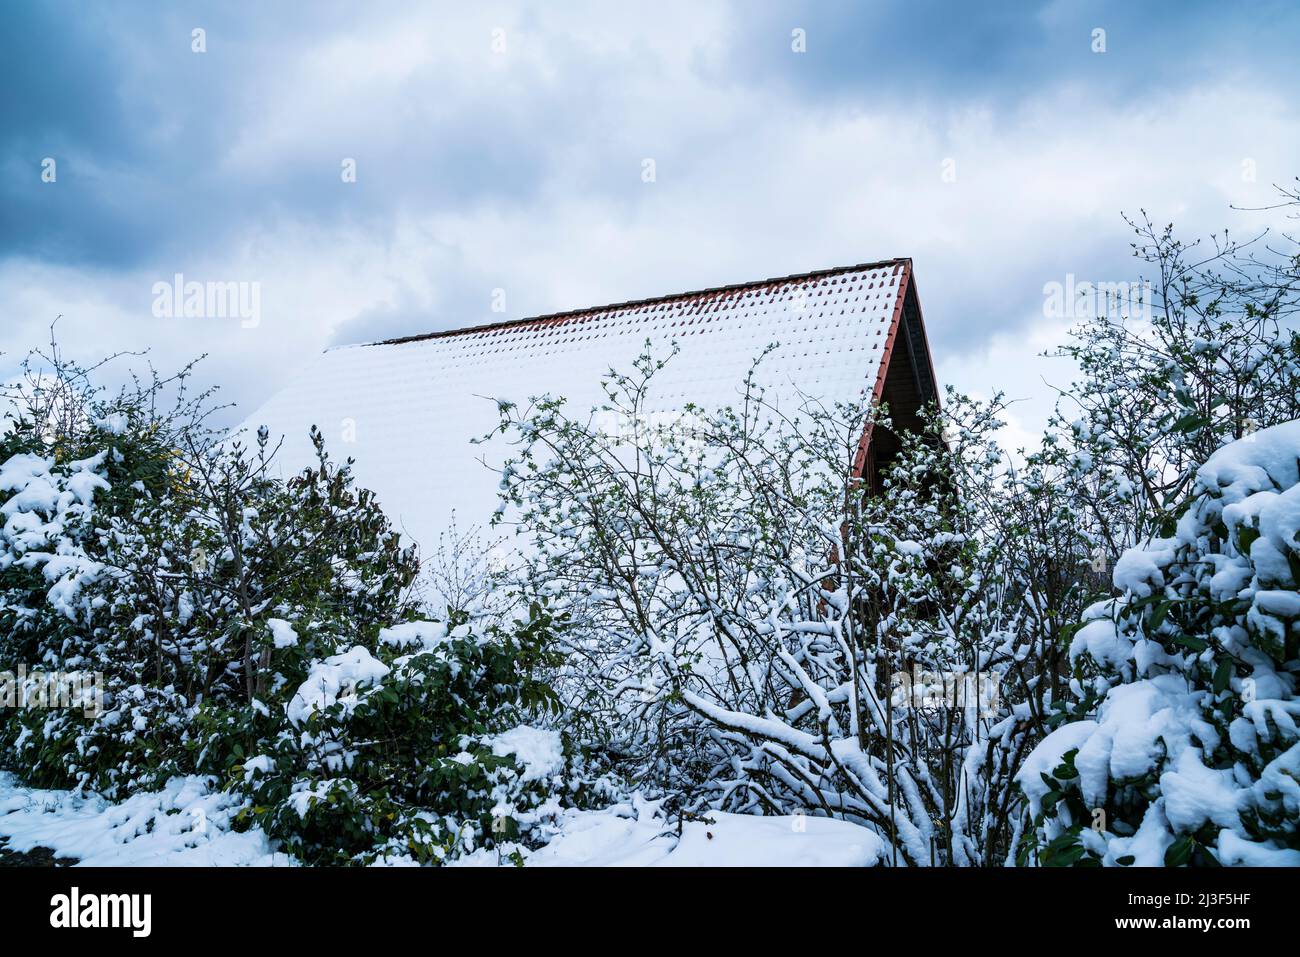 Mystical house with red roof covered by white snow in winter wonderland scene landscape surrounded by plants and trees Stock Photo